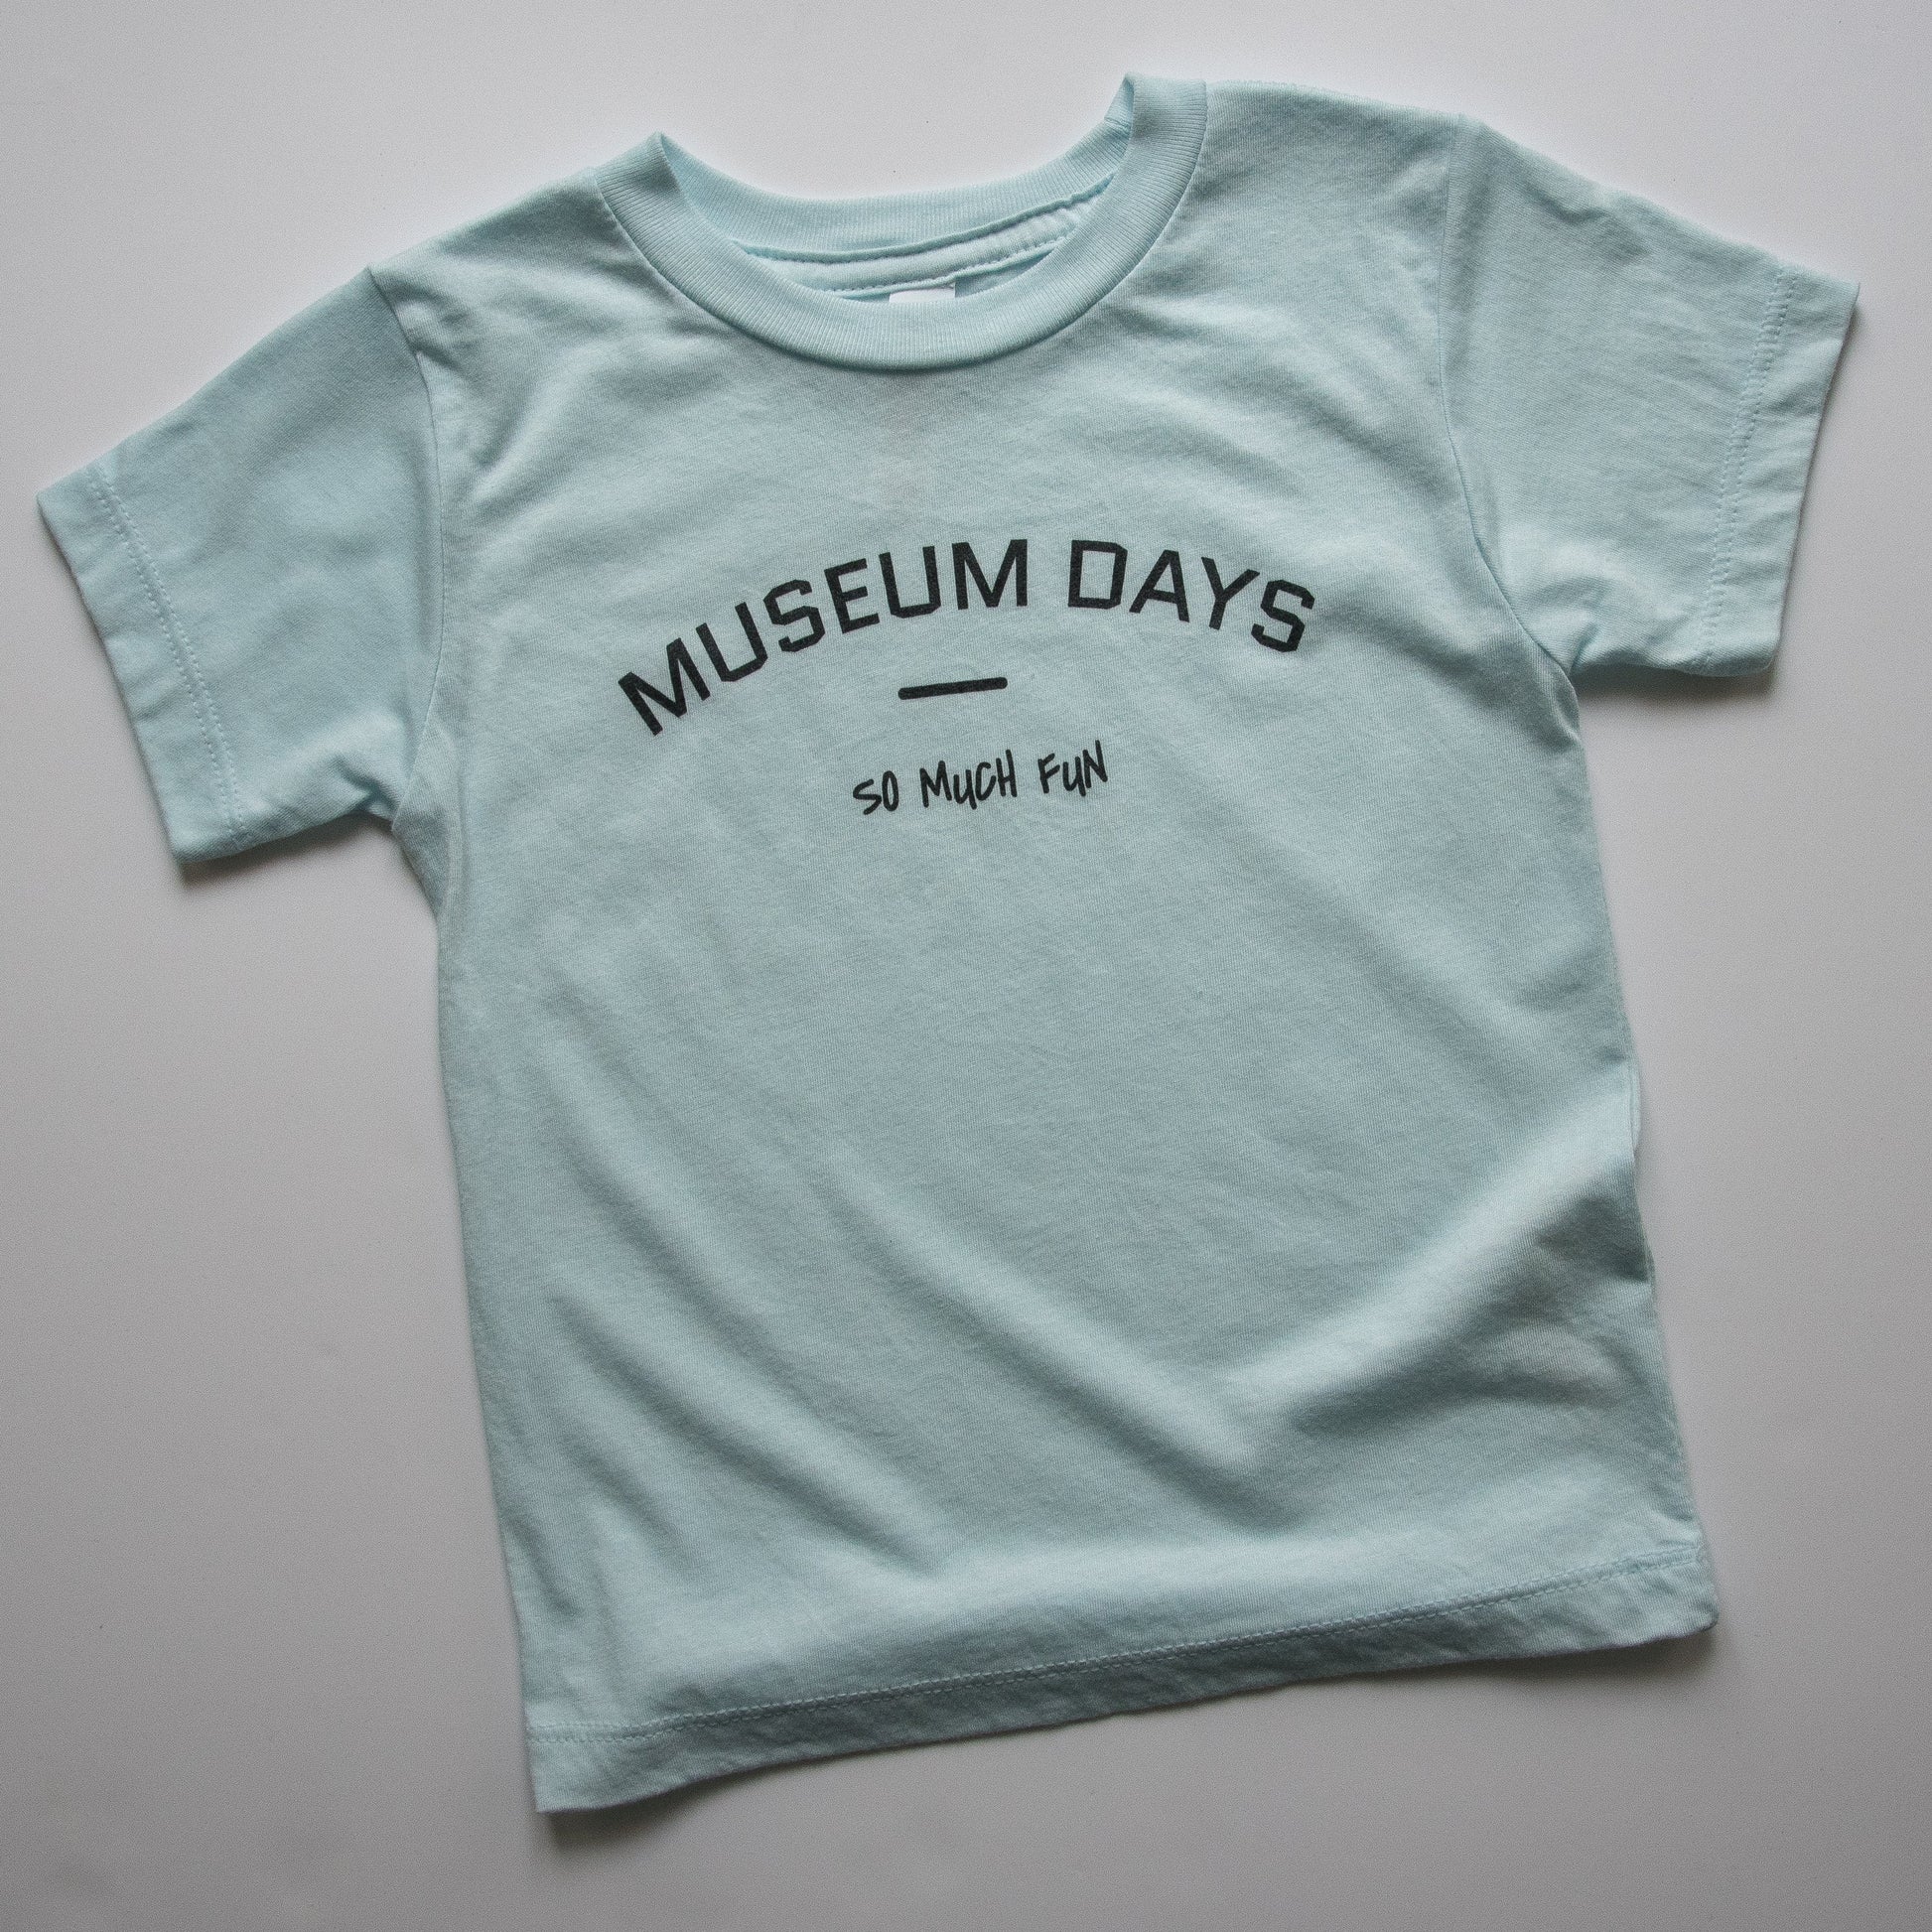 MUSEUM DAYS SO MUCH FUN - Short Sleeve Toddler Tee - 2 COLORS! - Little Mate Adventures 